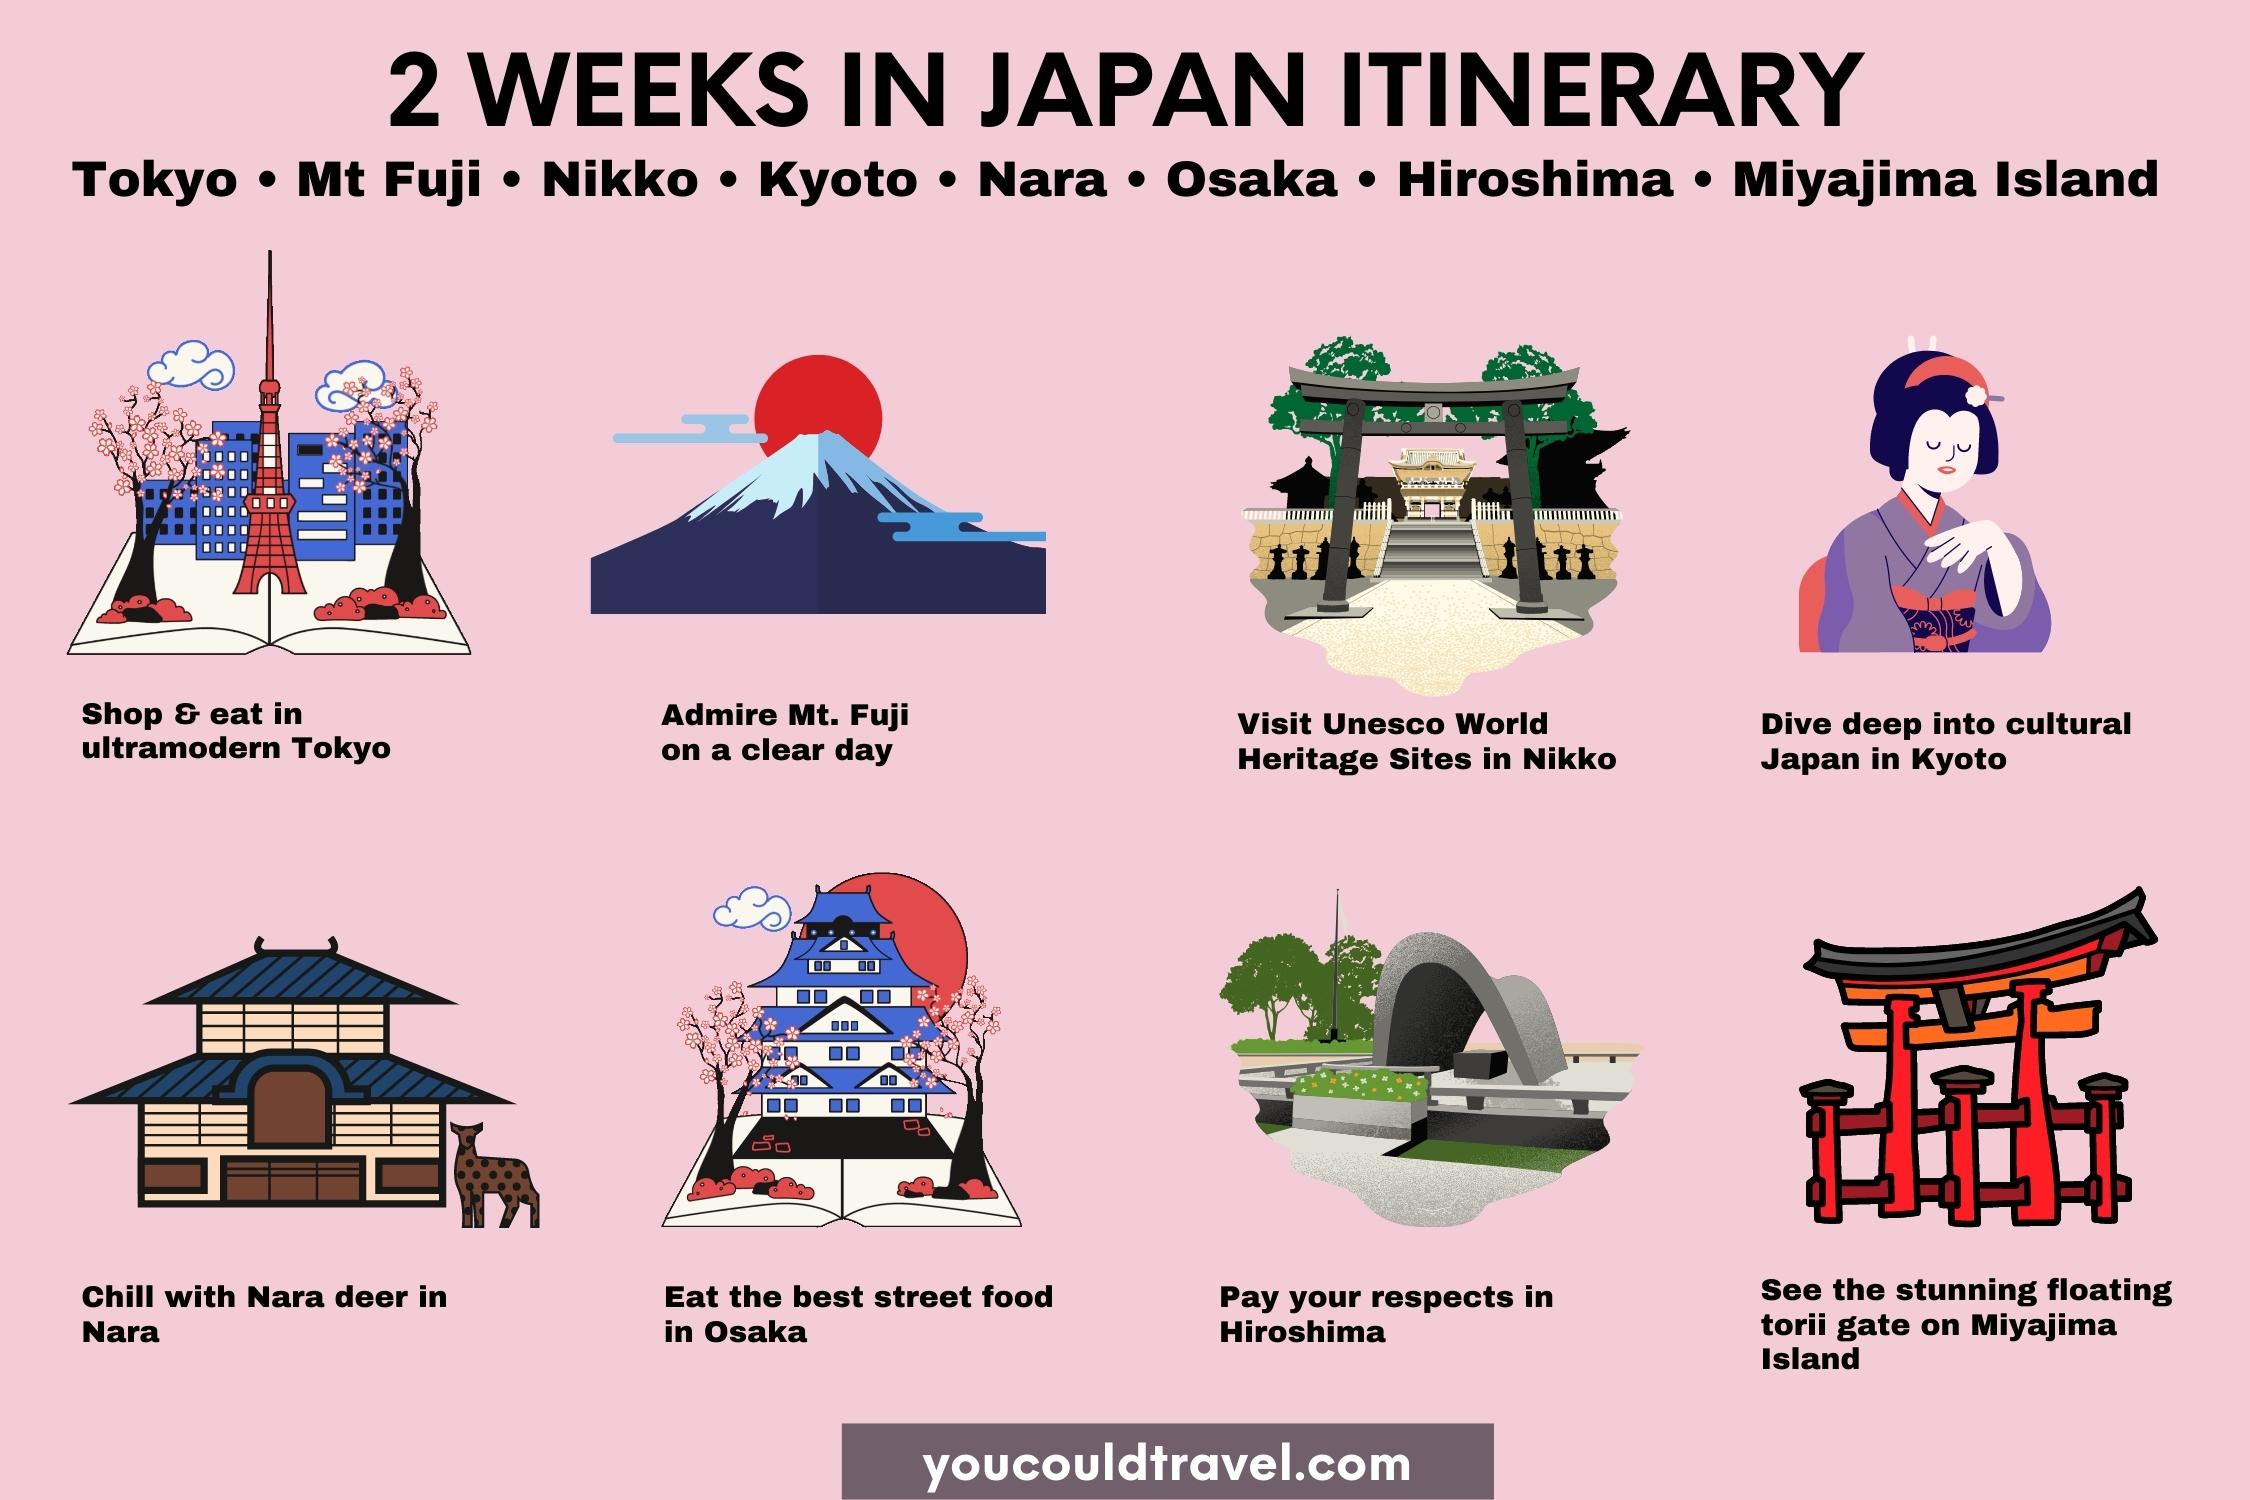 2 weeks in Japan itinerary